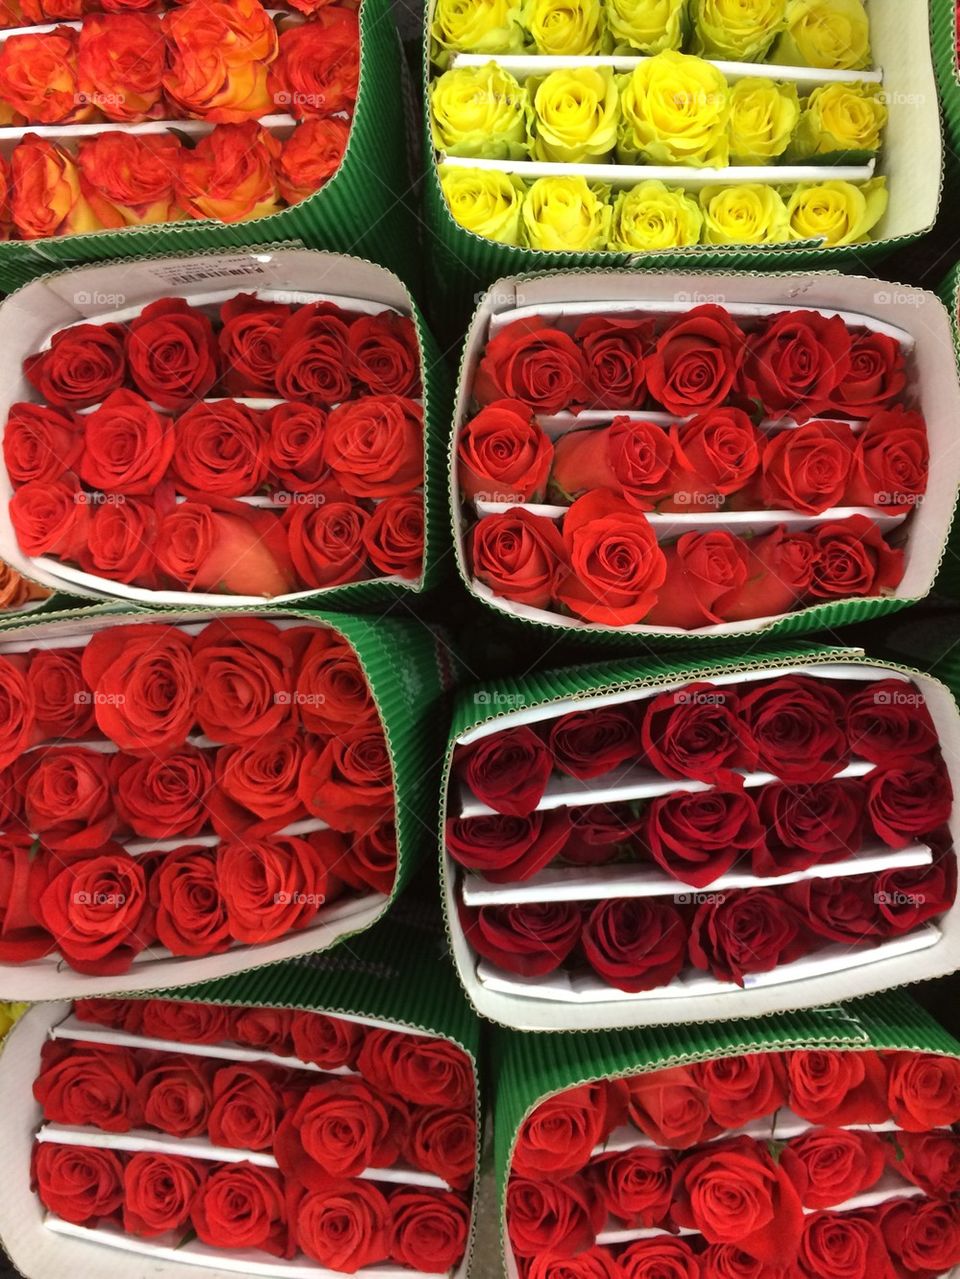 Rows of roses